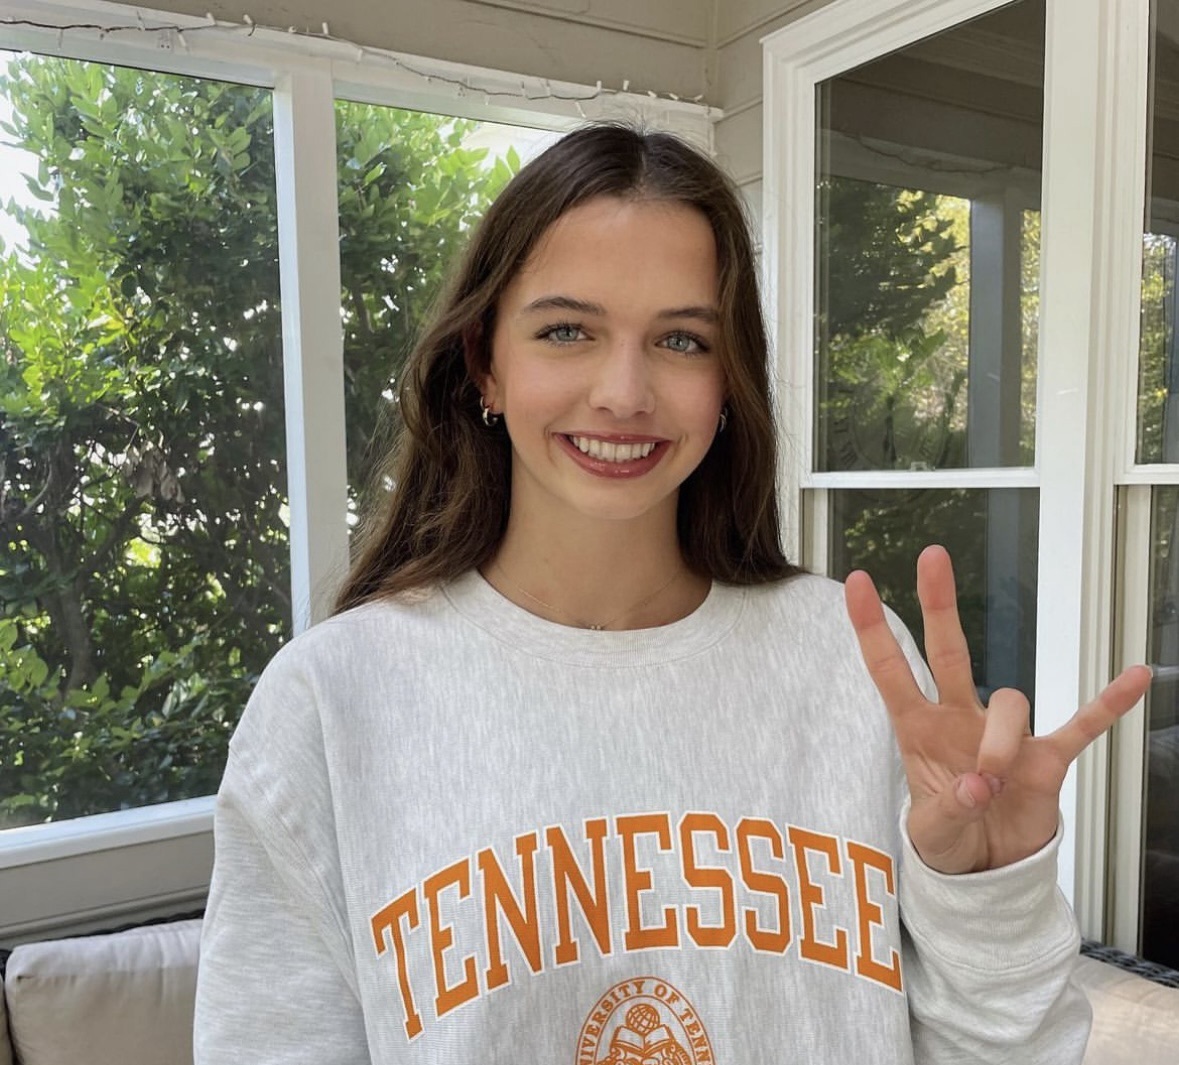 Meredith Whelehan (‘25) announced her commitment to swim at the University of Tennessee after ten years of competitive swimming. Photo used with permission from Meredith Whelehan.